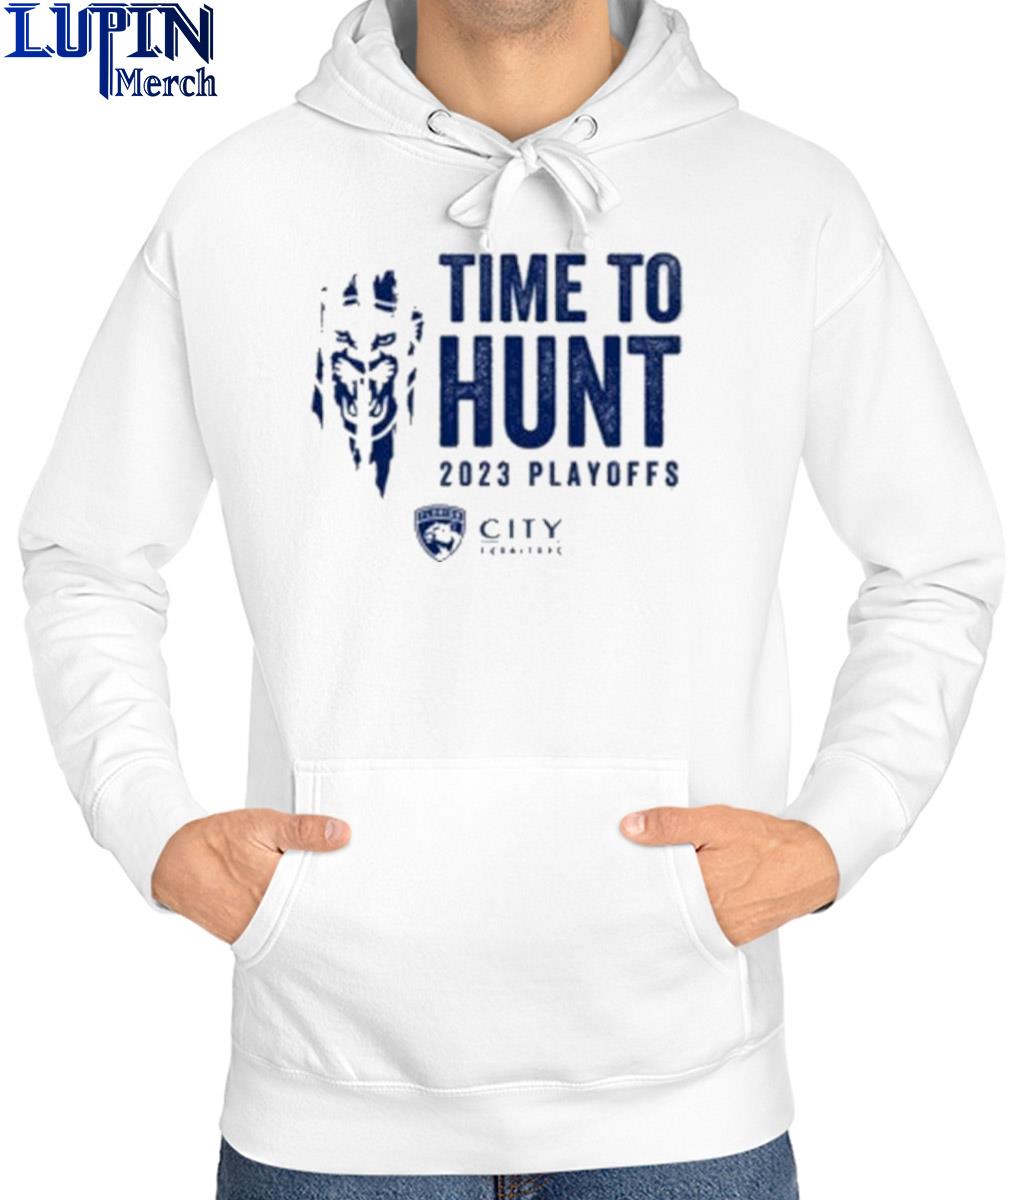 Florida Panthers Time To Hunt 2023 Playoffs Shirt, hoodie, sweater